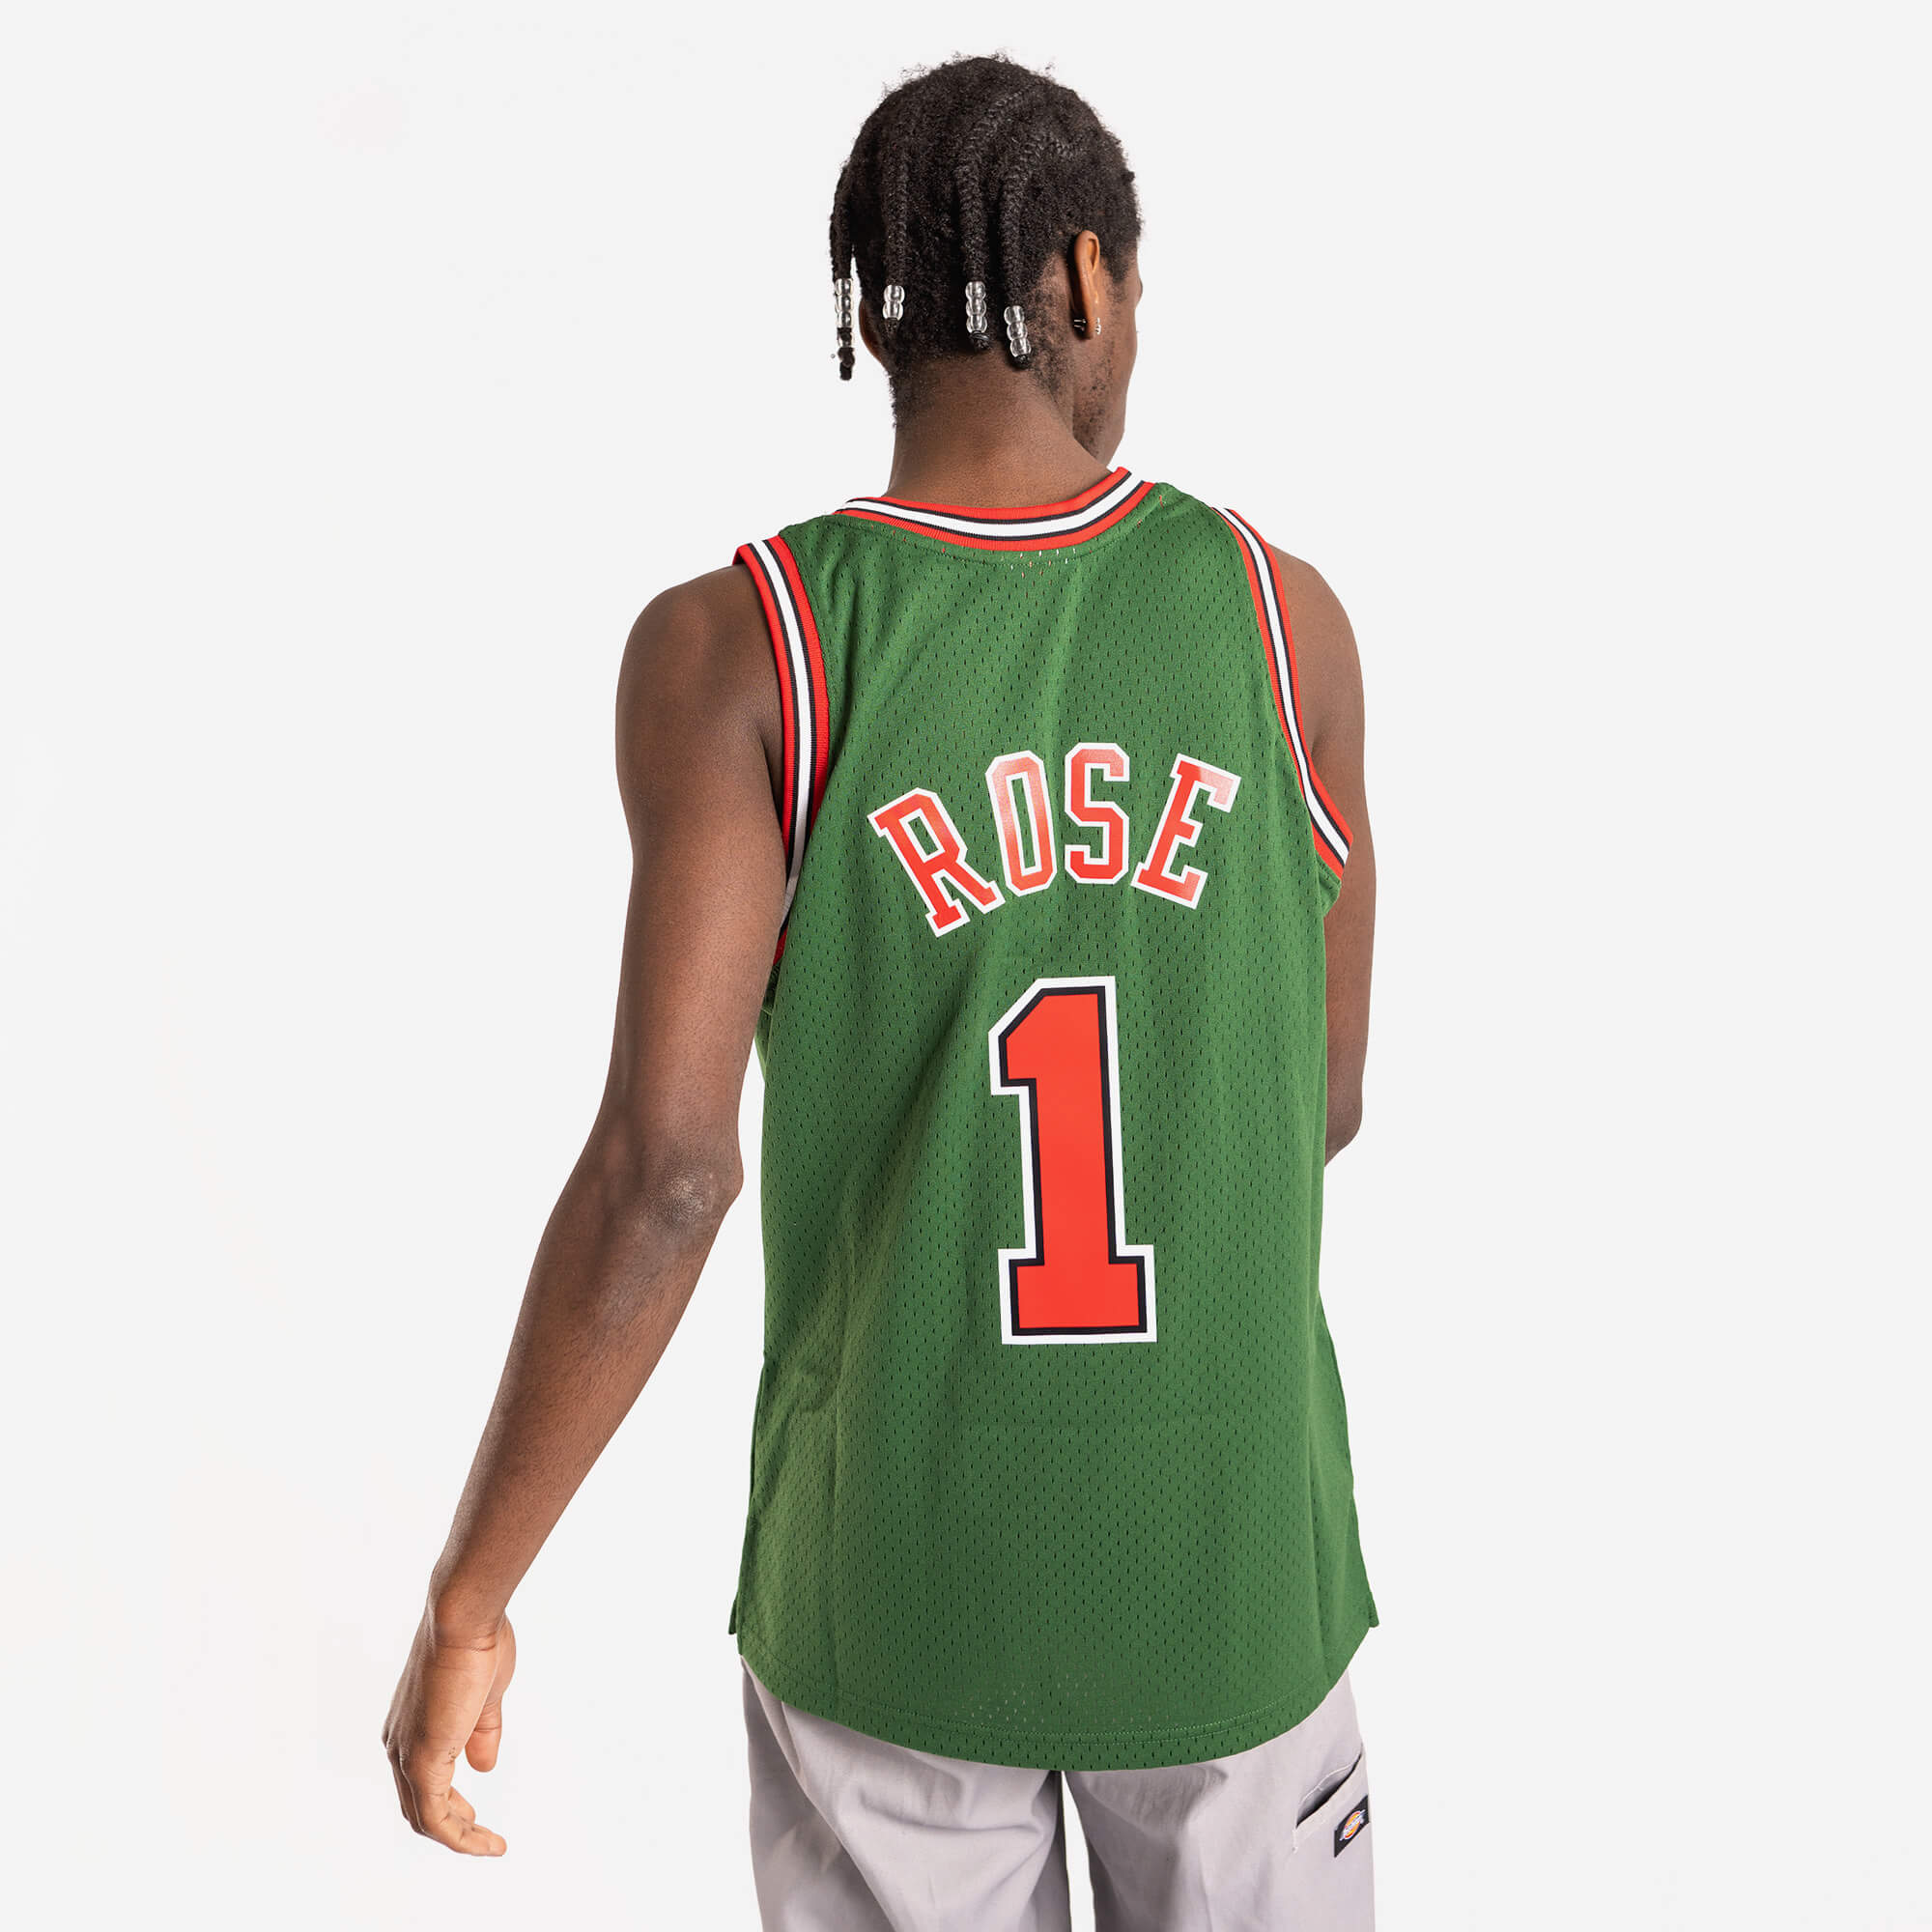 NBA Jersey Database, Chicago Bulls Hardwood Classic: Chicago Stags